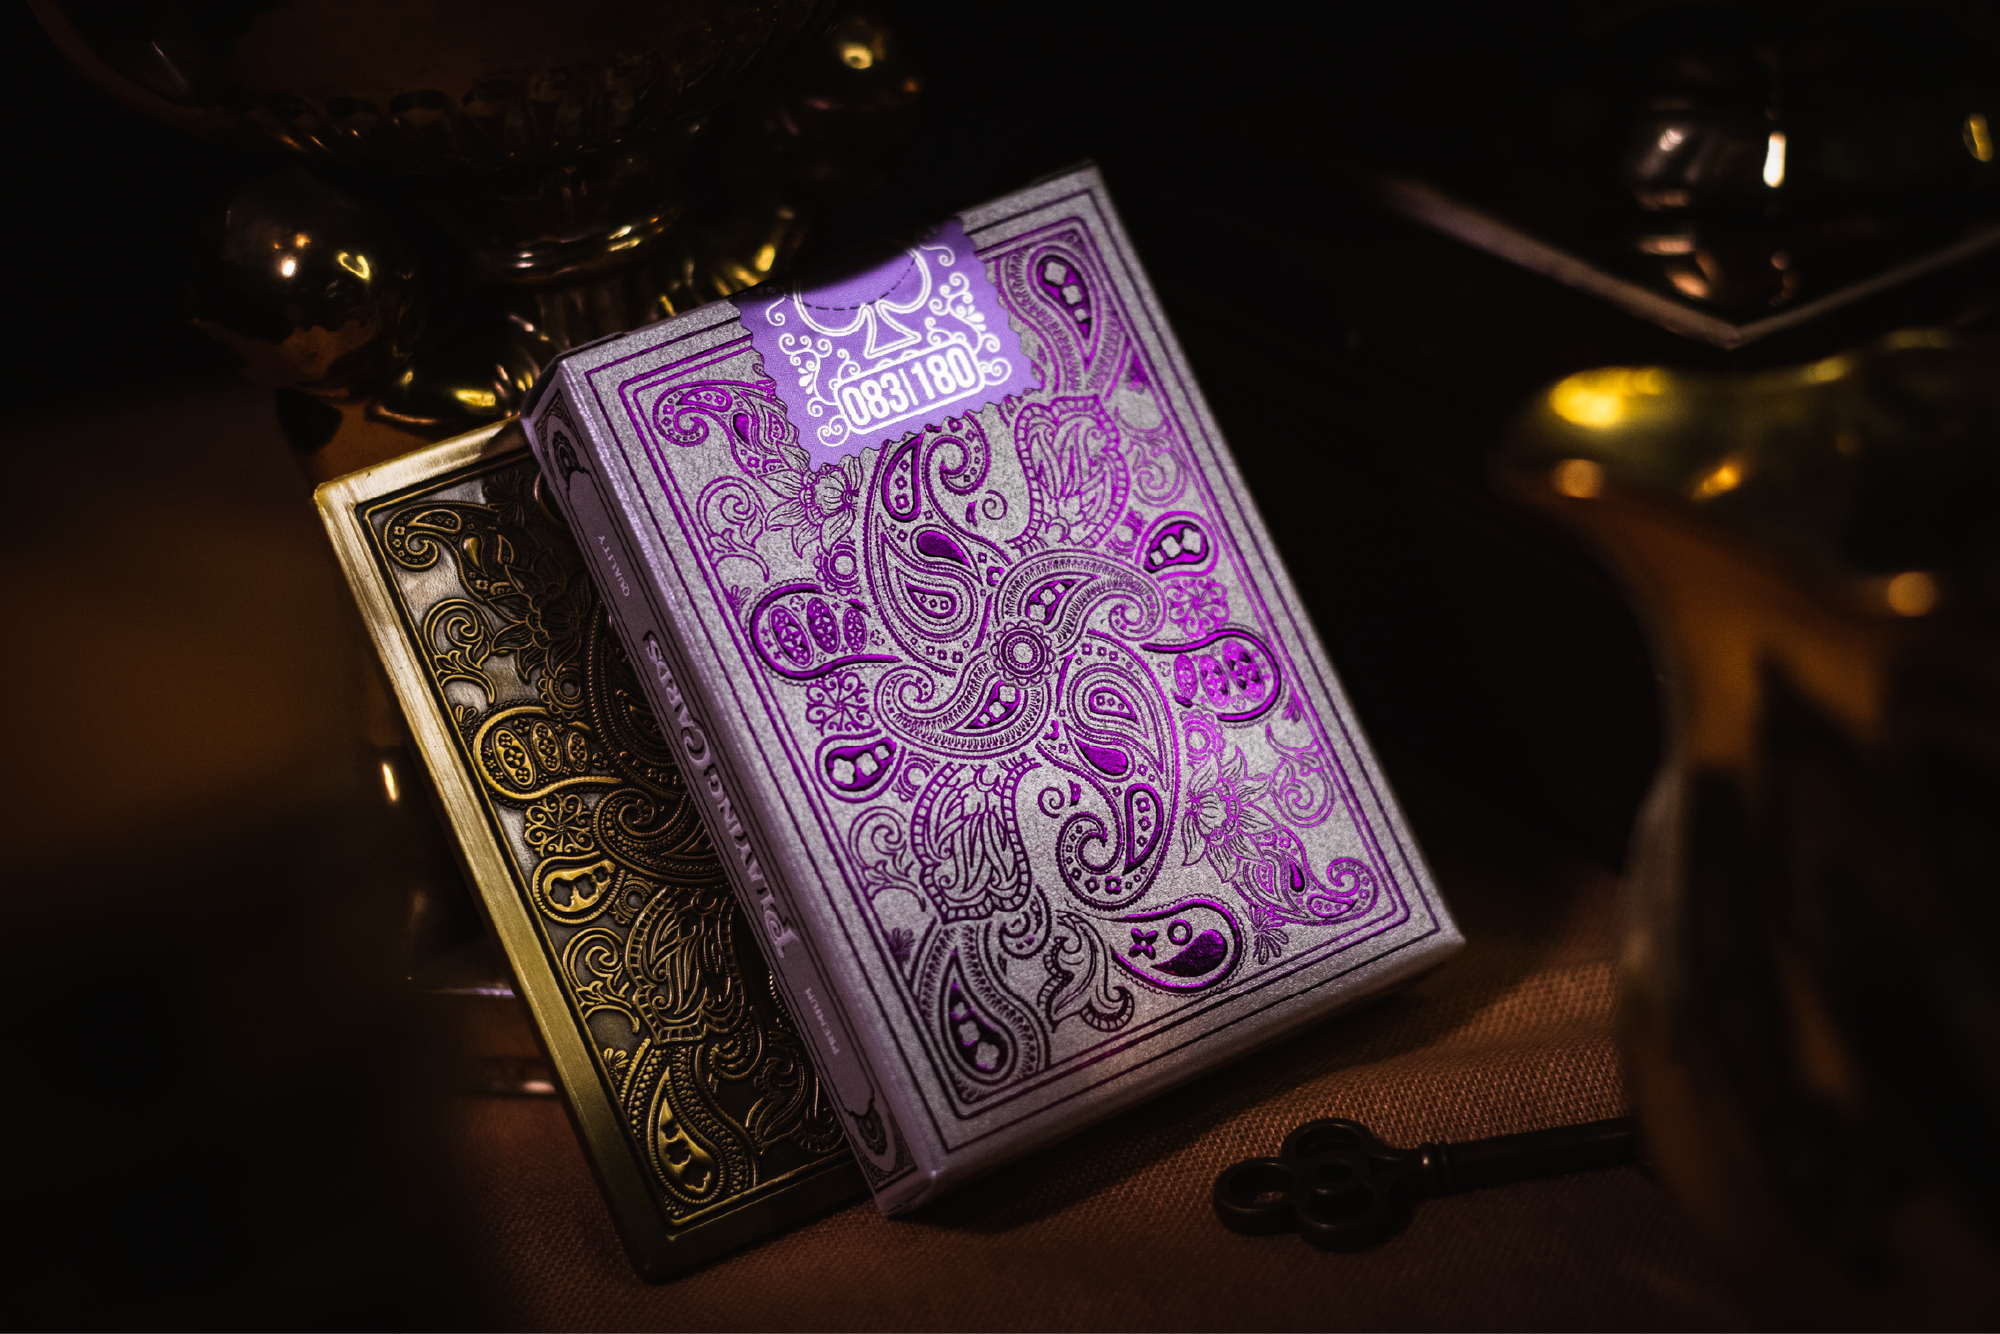 Wonder Playing Cards - Royal - Silver Gilded